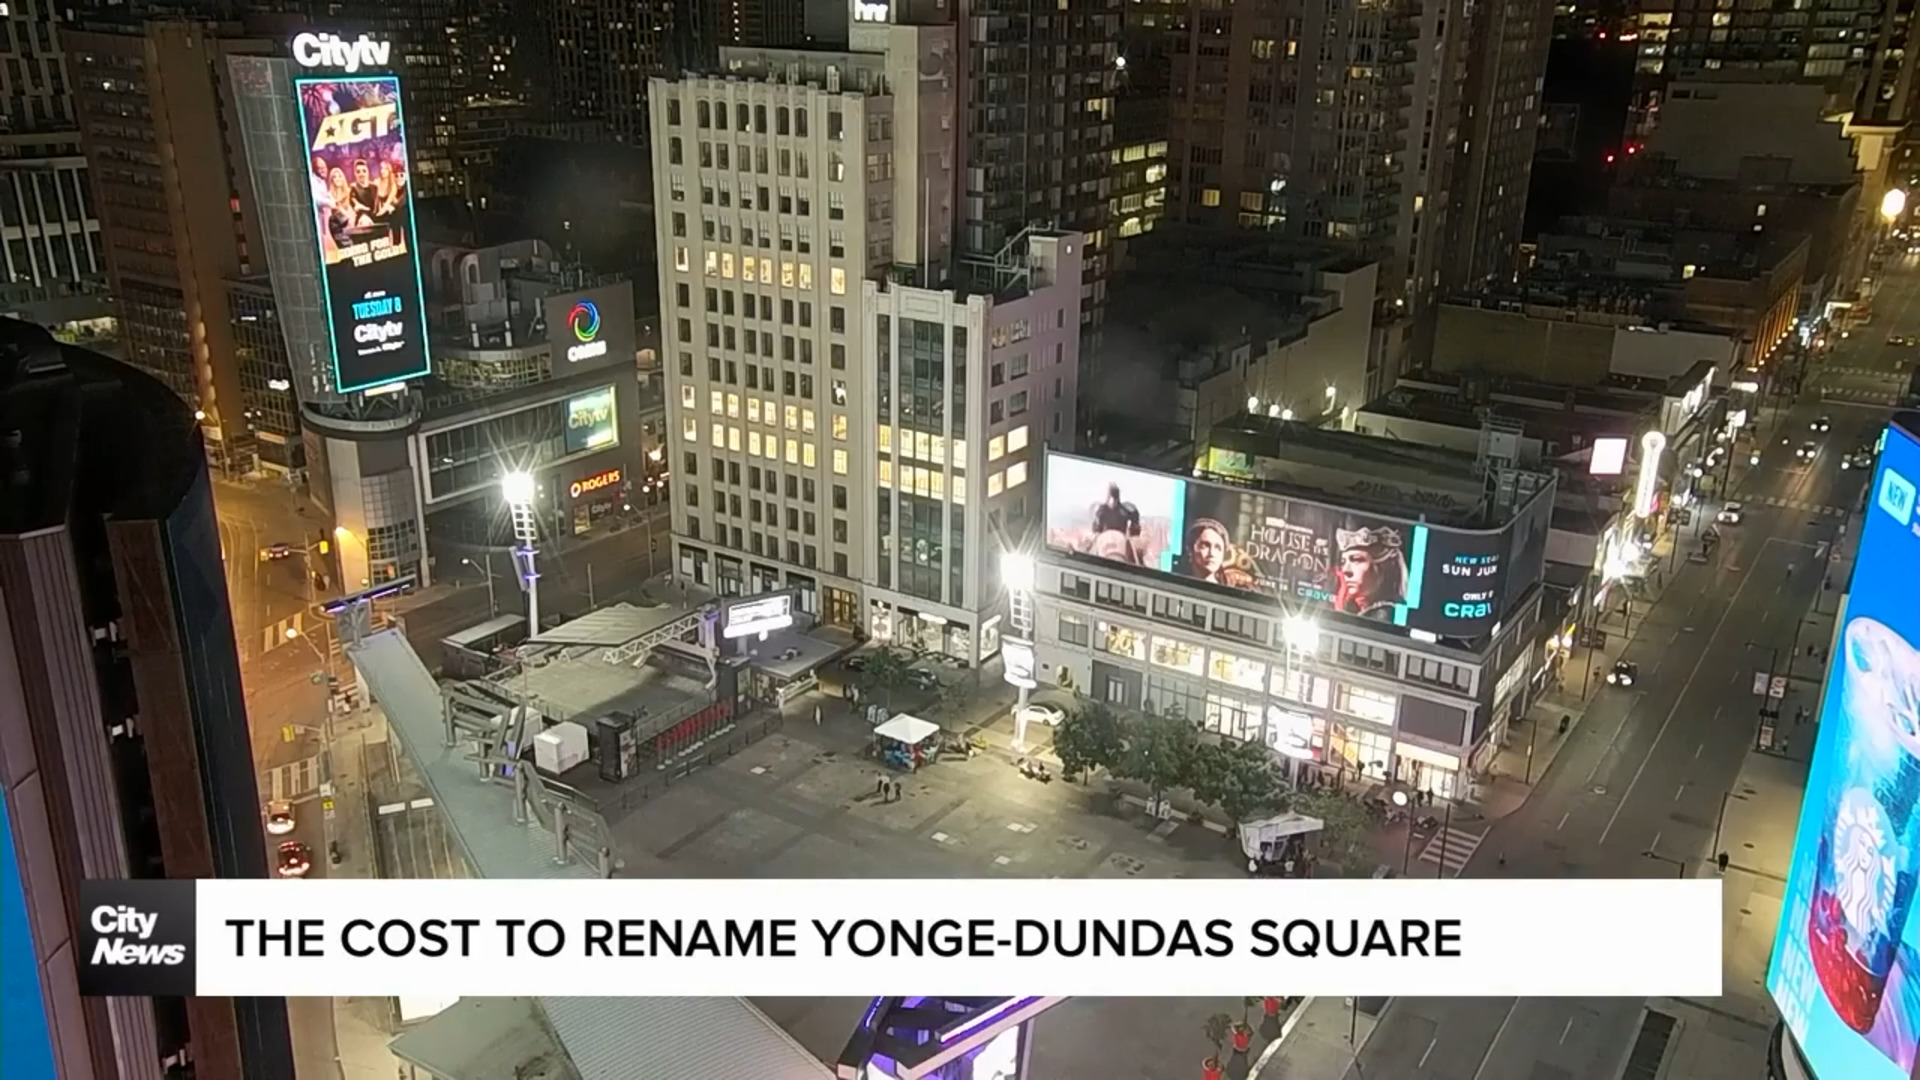 The potentially growing cost to rename Yonge-Dundas Square